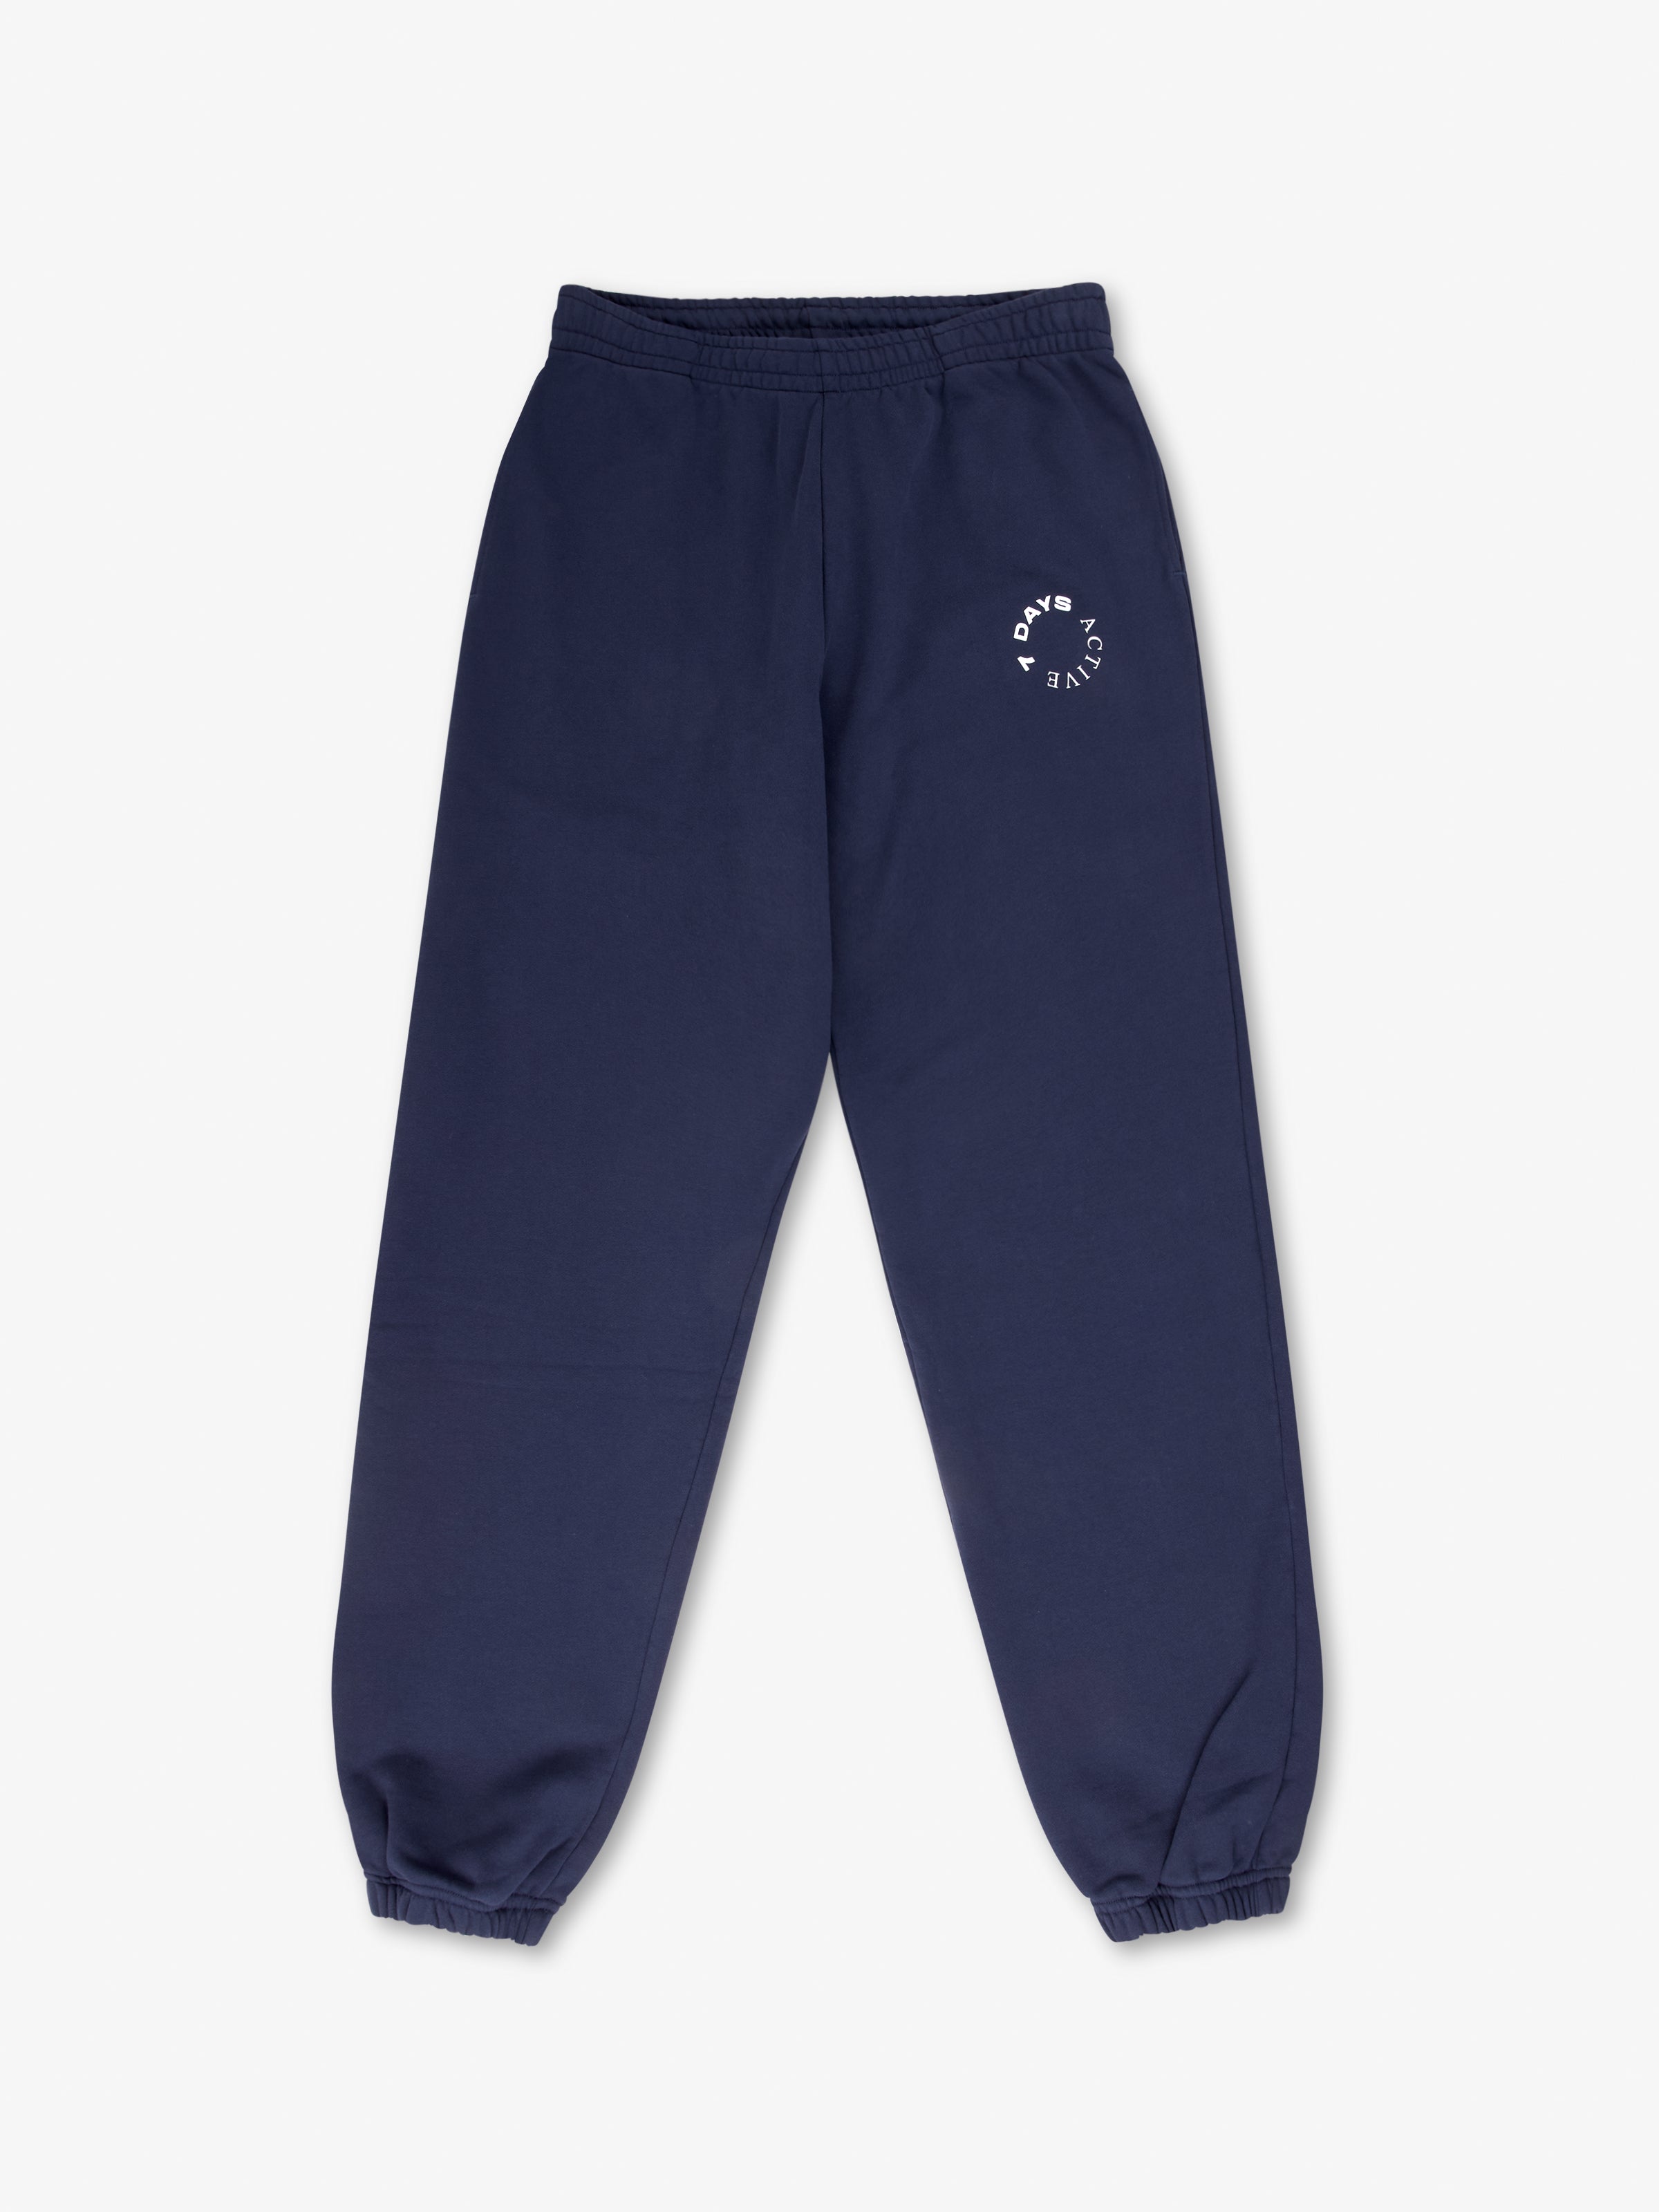 Pull&Bear oversized New York slogan sweatpants in navy blue - part of a set